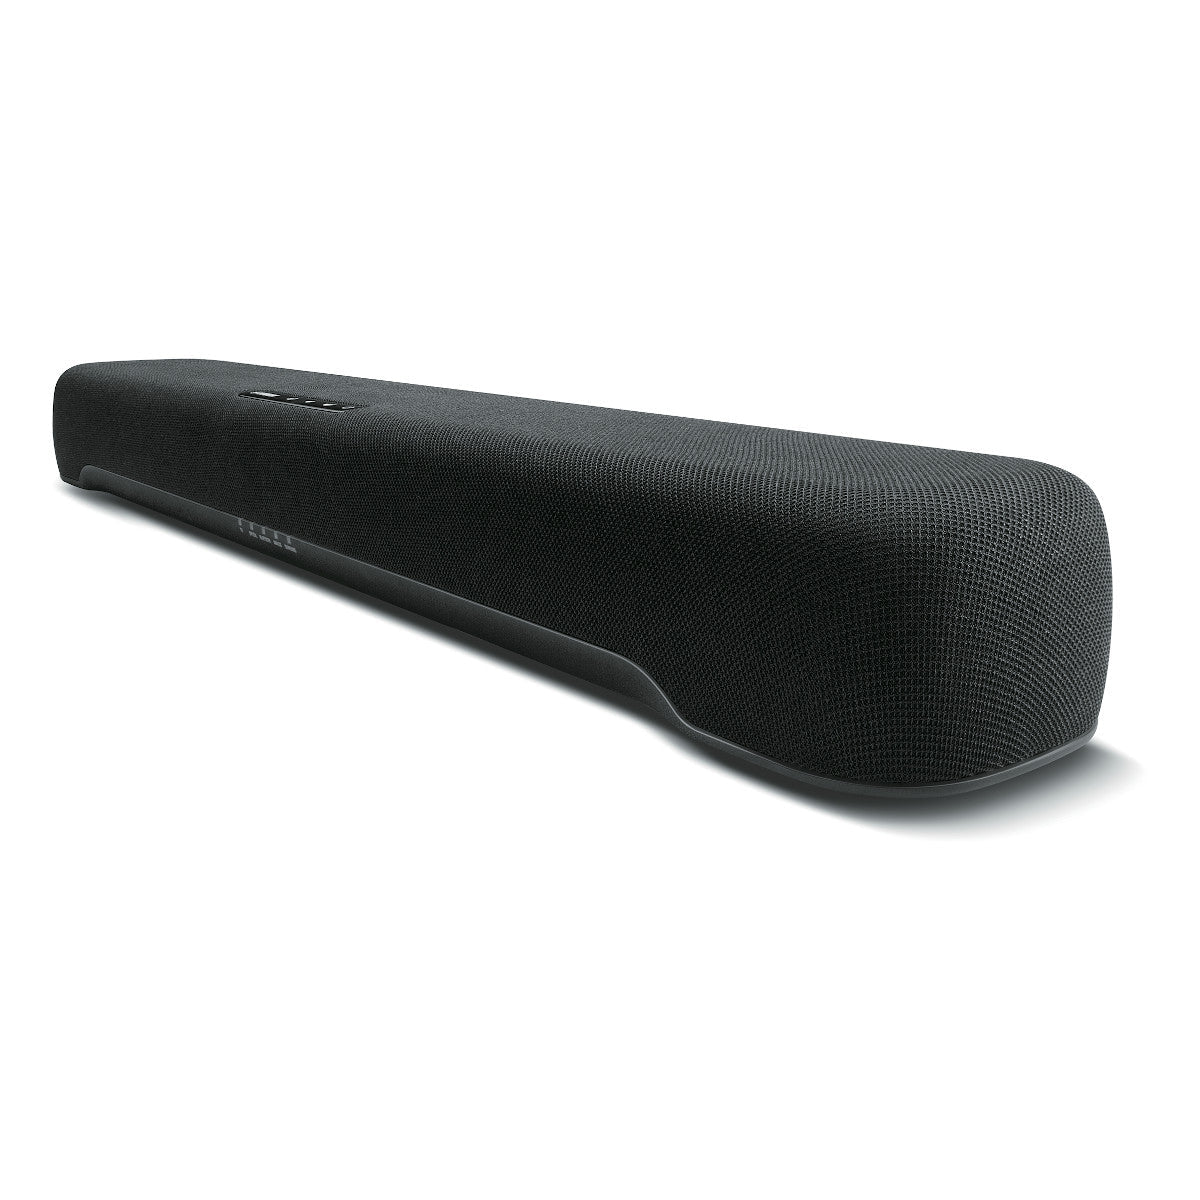 Yamaha SR-C20A Compact Sound Bar with Built-In Subwoofer and Bluetooth